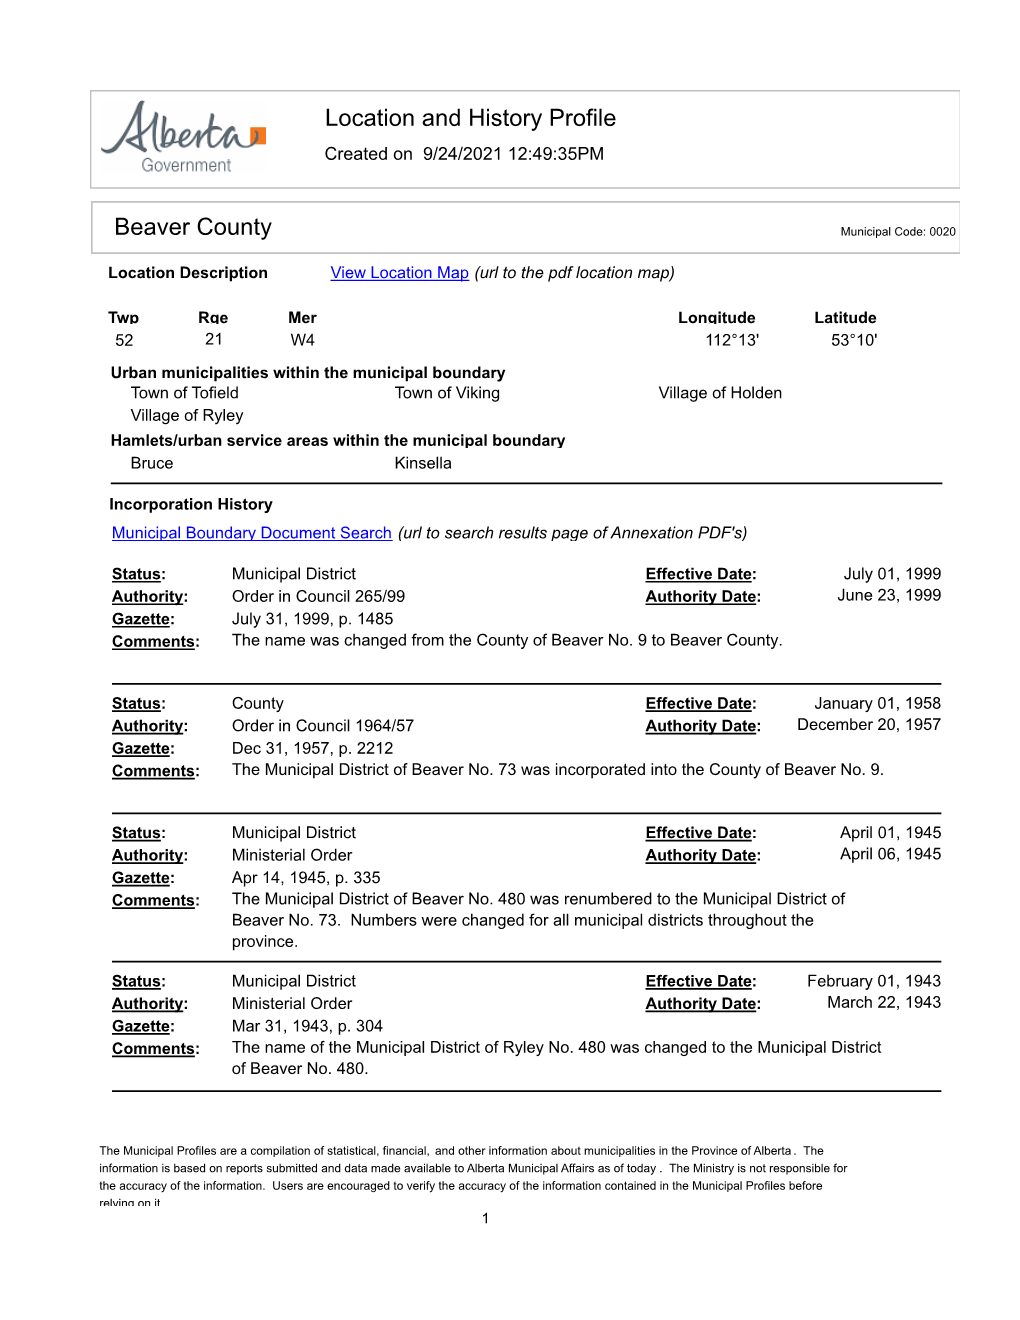 Location and History Profile Beaver County